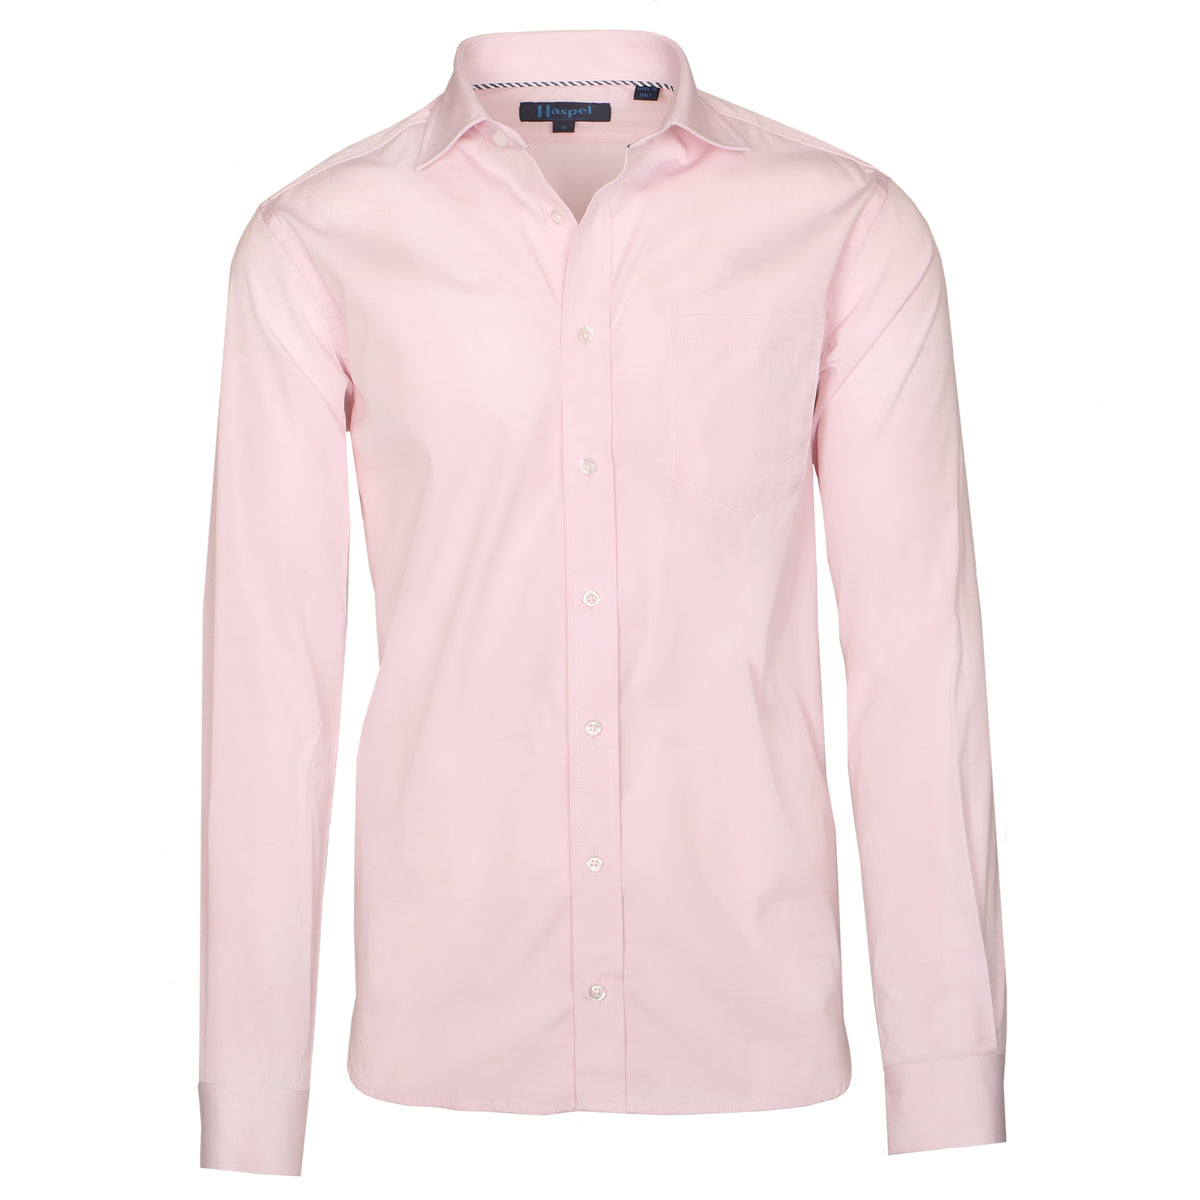 Broadcloth to adorn those broad shoulders. Pretty in pink. Damn right.  100% Cotton  •  Long Sleeve  •  Spread Collar  •  Chest Pocket  •  Button Cuff  •  Machine Washable  •  Made in Italy Return Policy